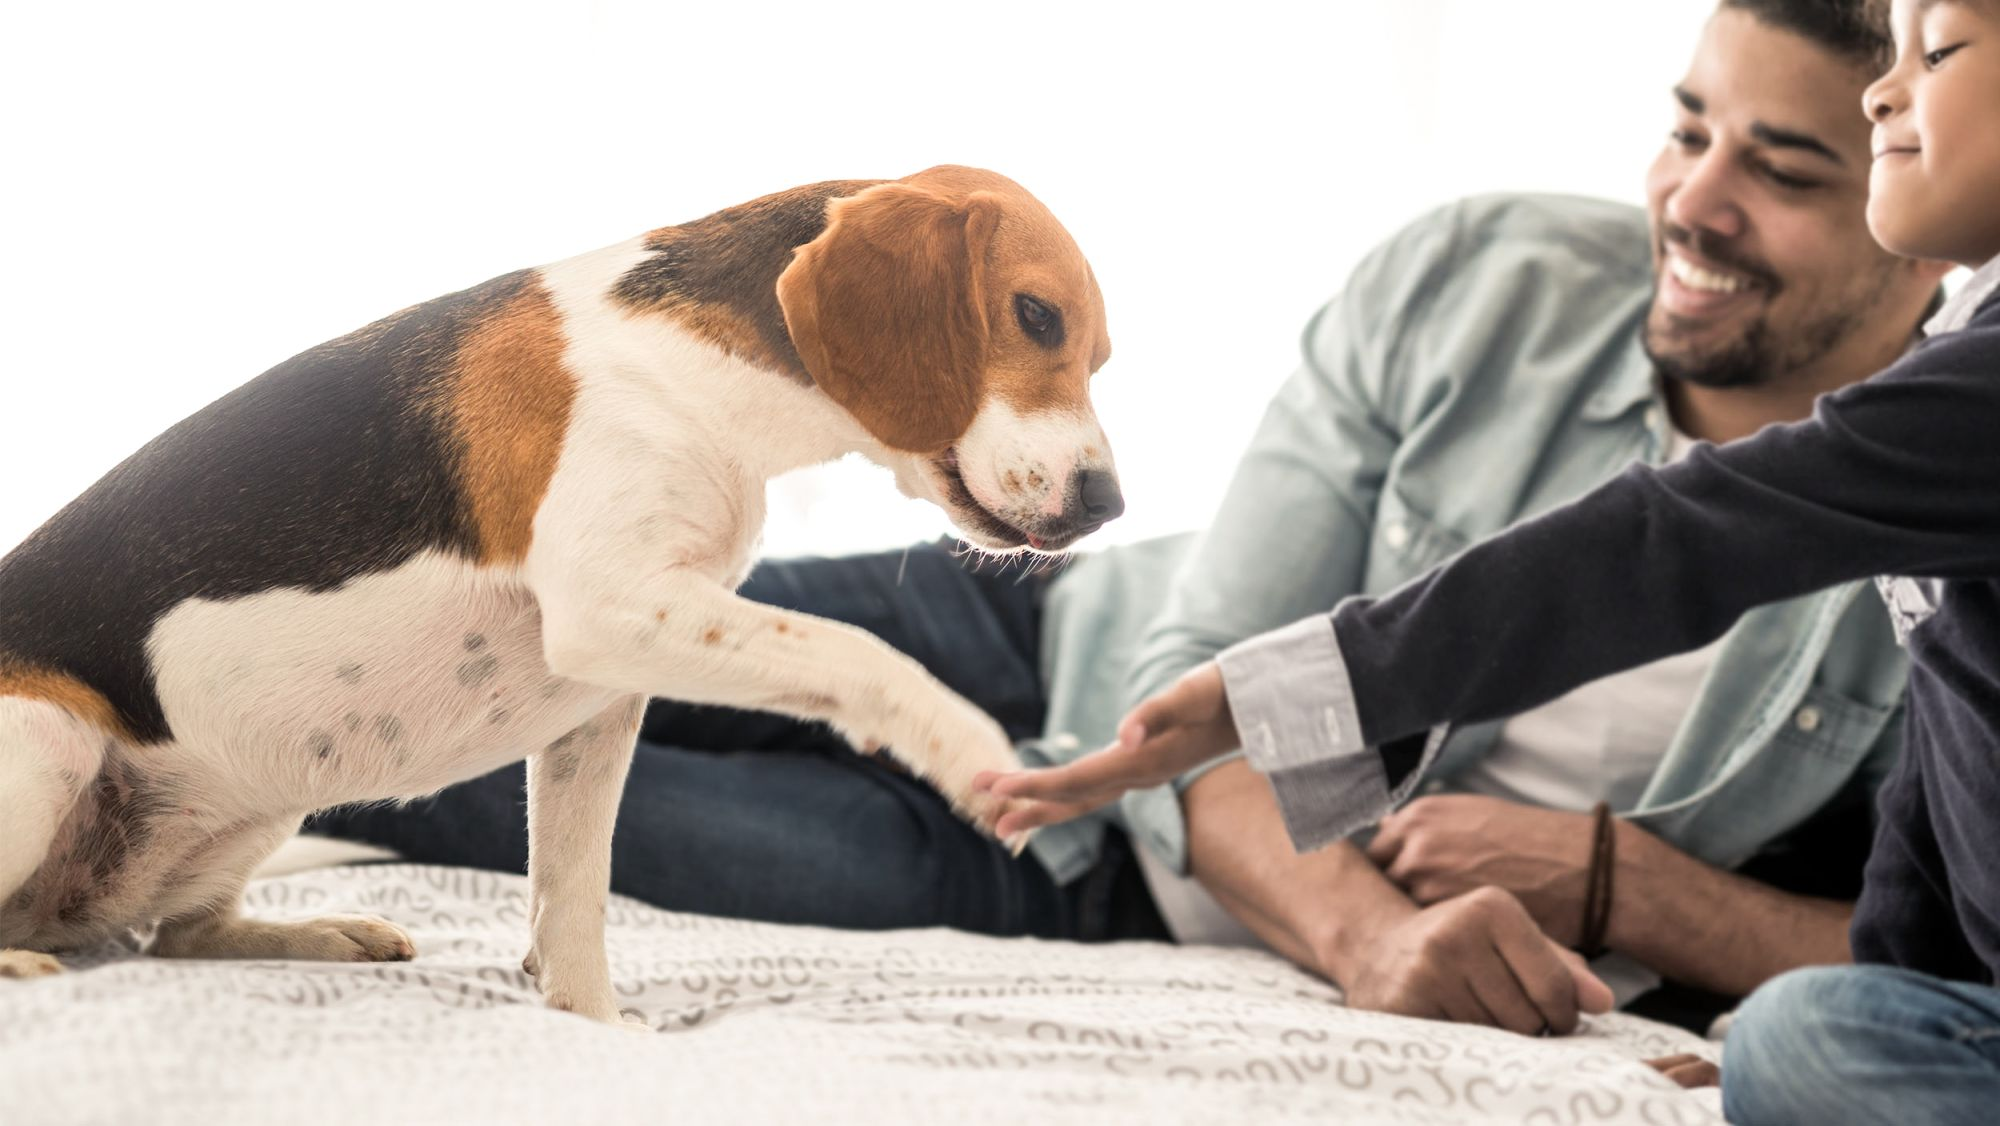 Adult Beagle sitting down on a bed offering a paw to a child while father supervises.